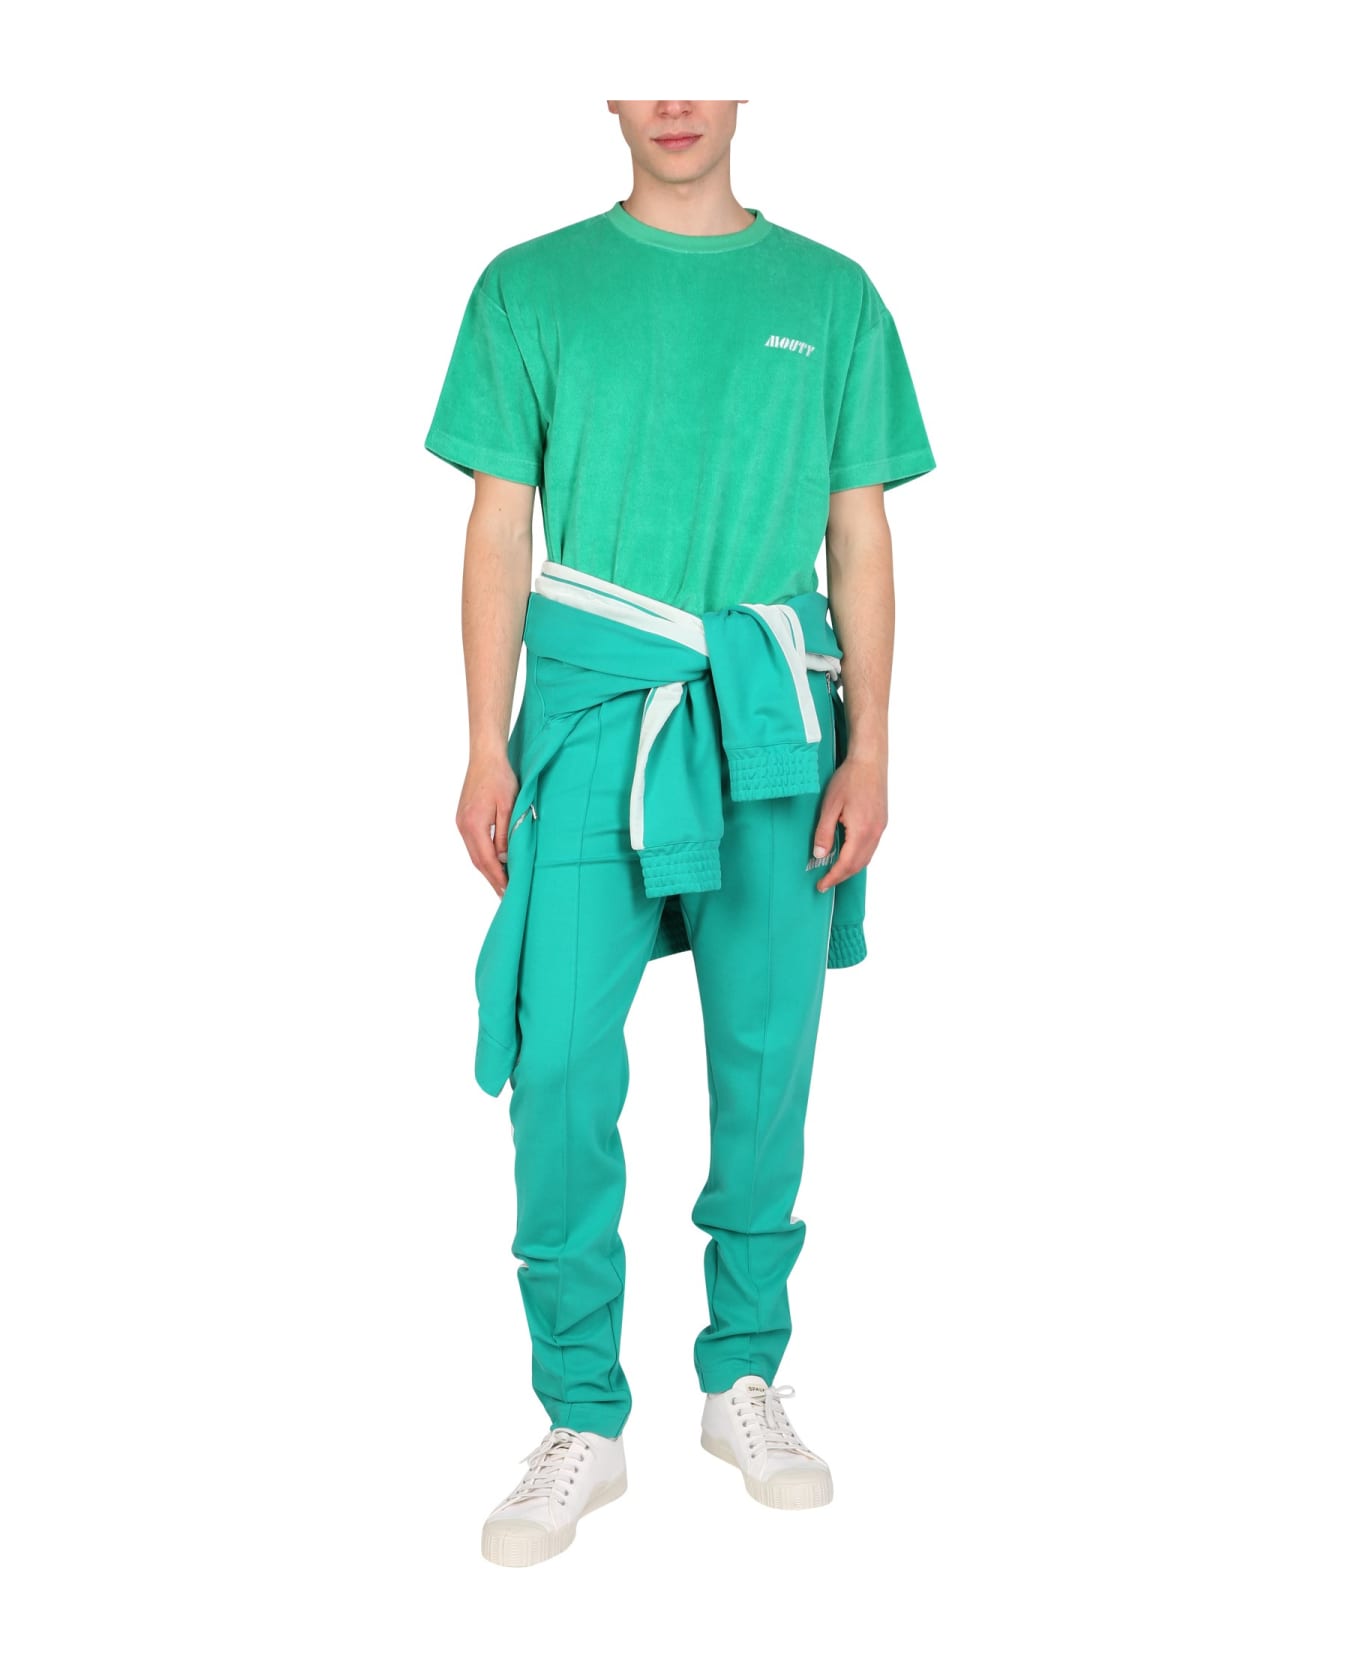 Mouty Terry T-shirt - VERDE